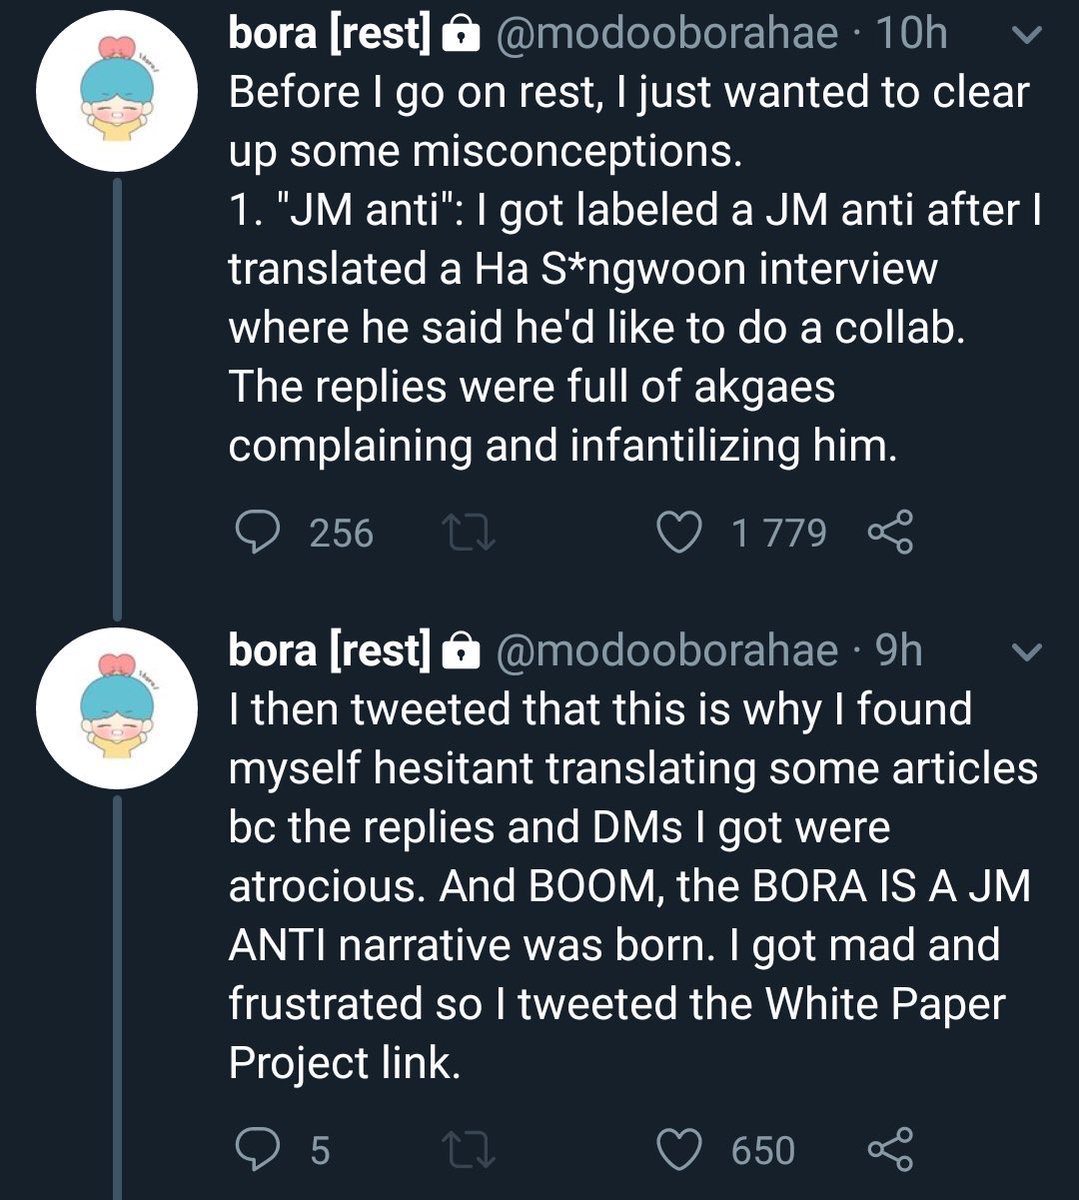 - When Bora got called out for showing J/M anti behaviour, she bragged about how she helped with the White Paper Project. This is a sensitive Topic and her bringing it back after years just to show off proves she doesn’t actually care about the backlash J/M got because of it.